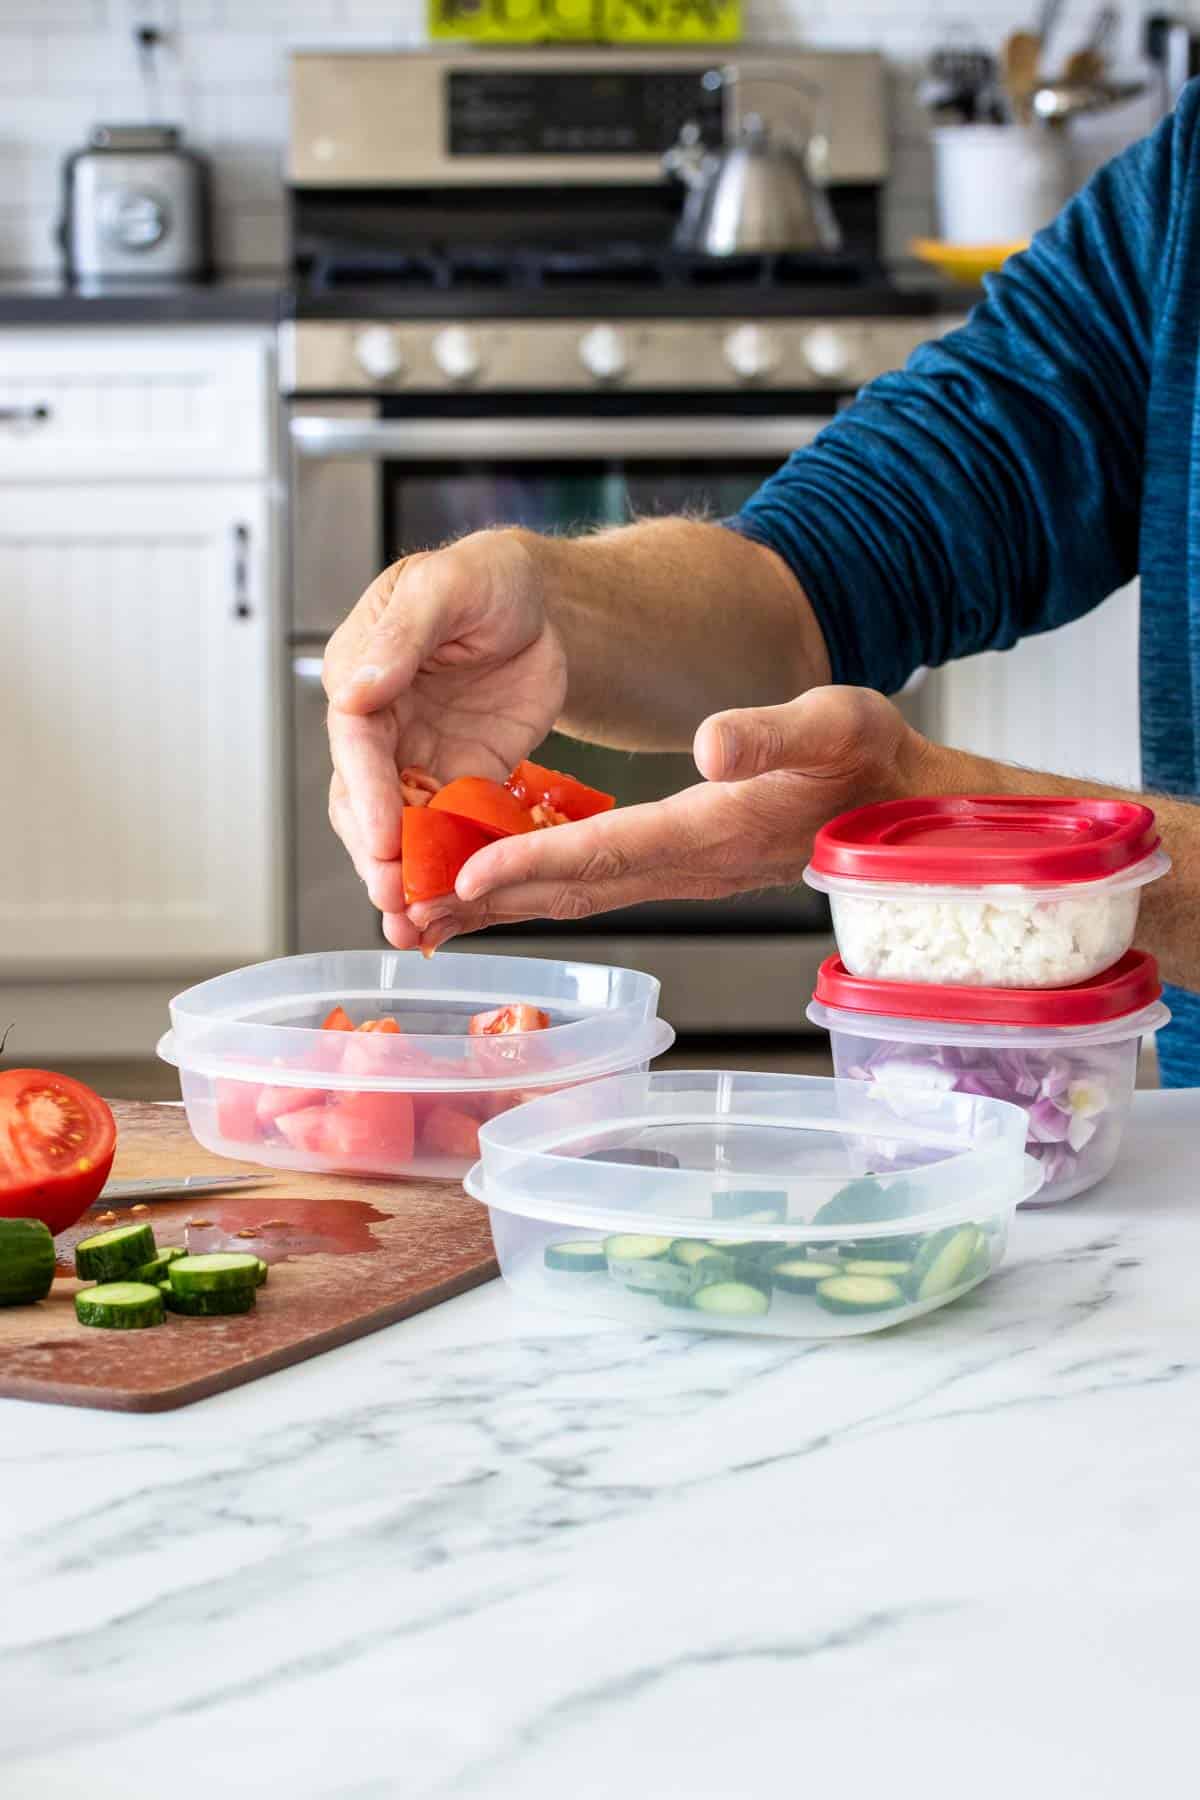 Hands putting cut tomatoes into a plastic container next to other containers filled with veggies